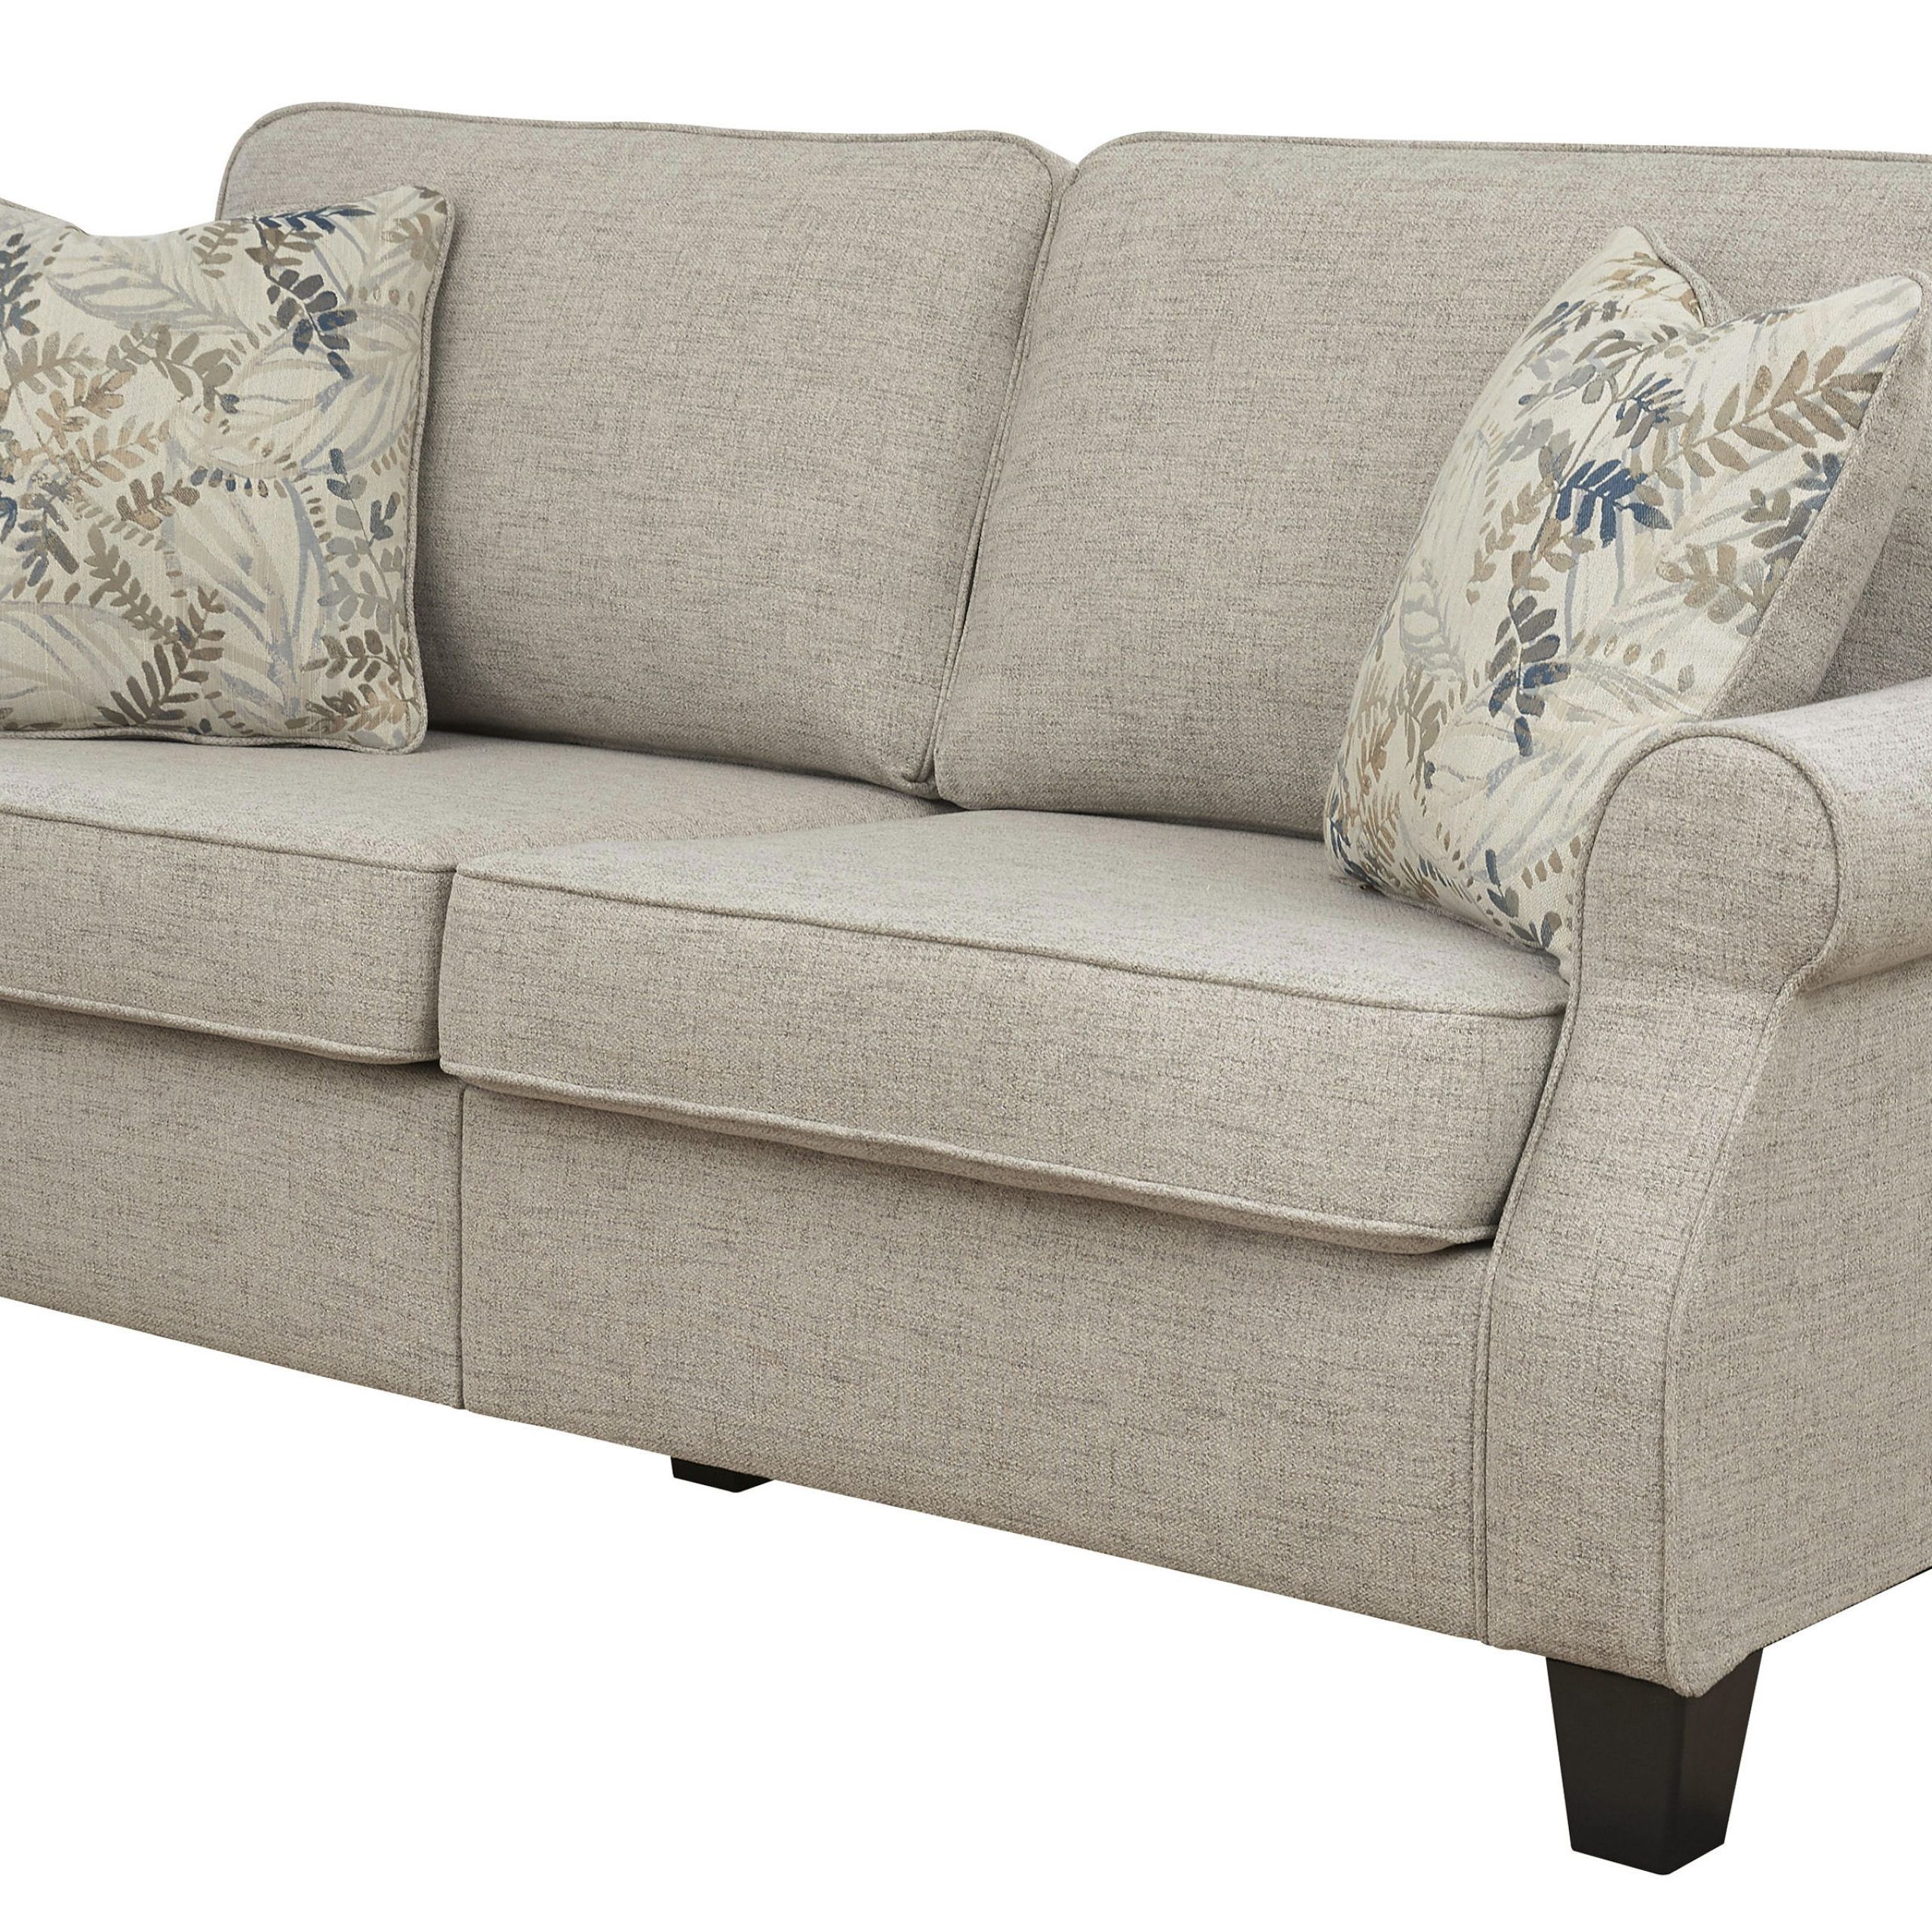 Most Recently Released Ecru And Otter Coffee Tables Regarding Ashley Furniture Alessio Beige Sofa (View 4 of 20)